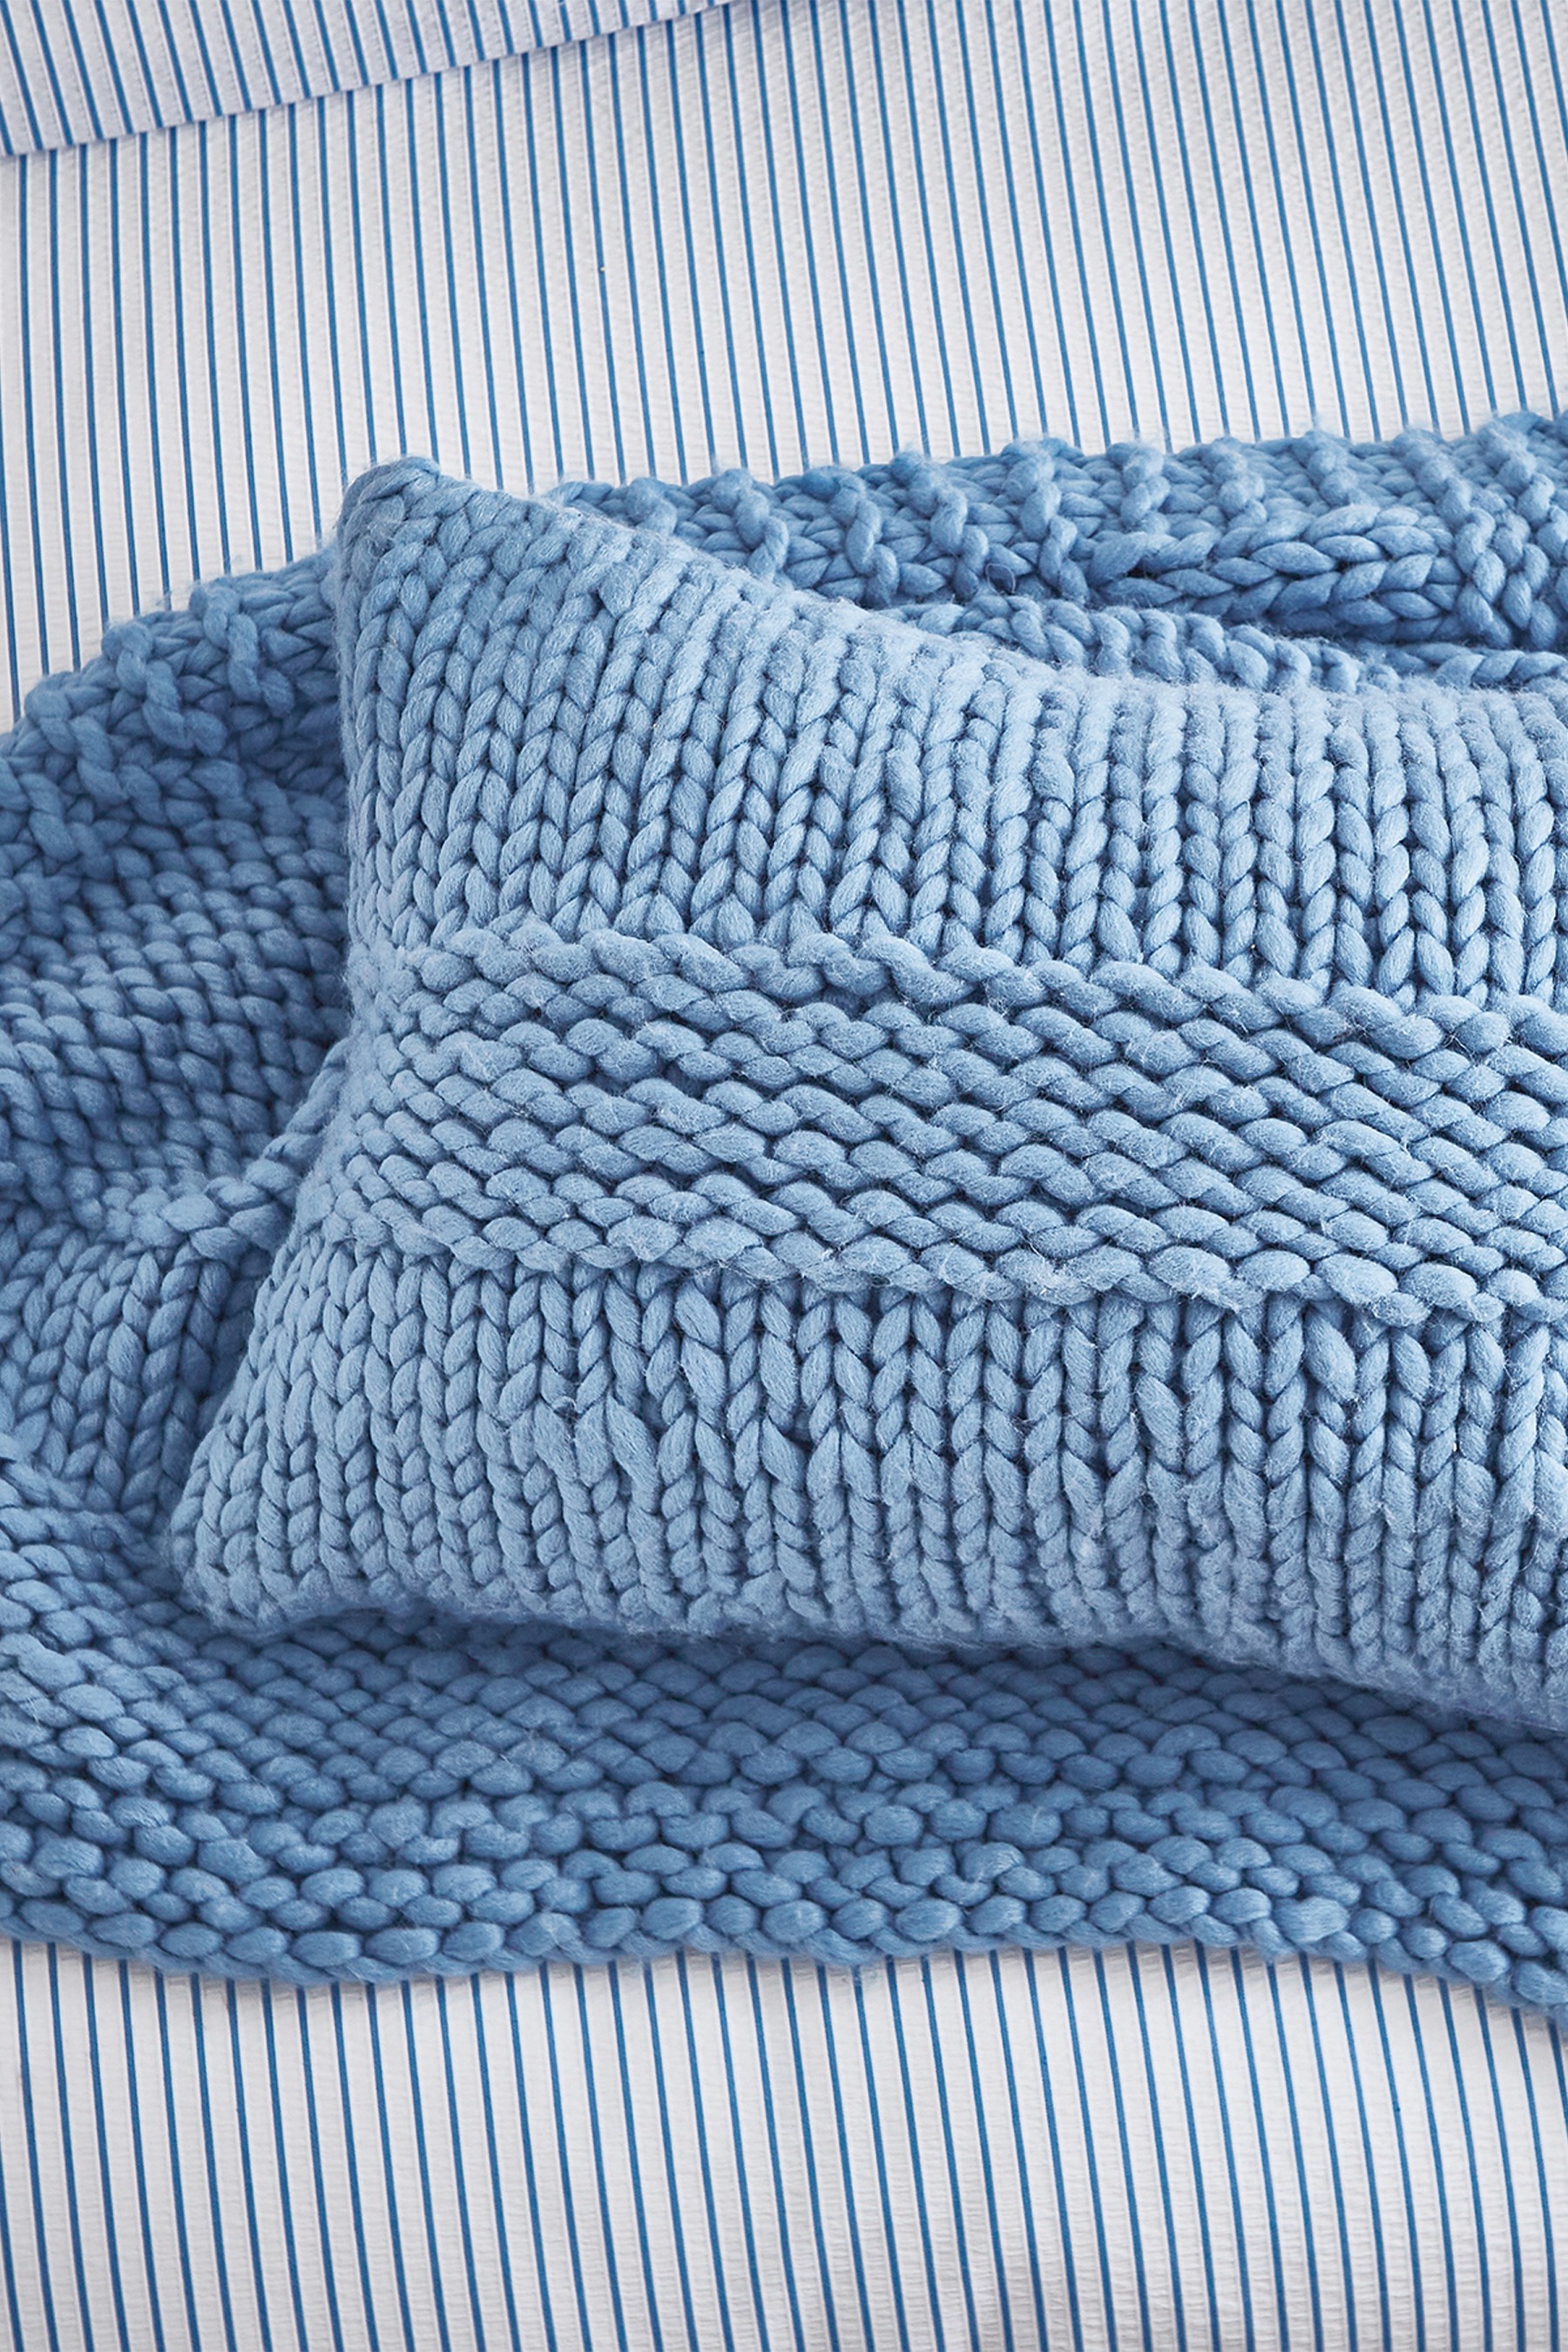 Katie Piper Wool Blend Be Still Chunky Knit Throw